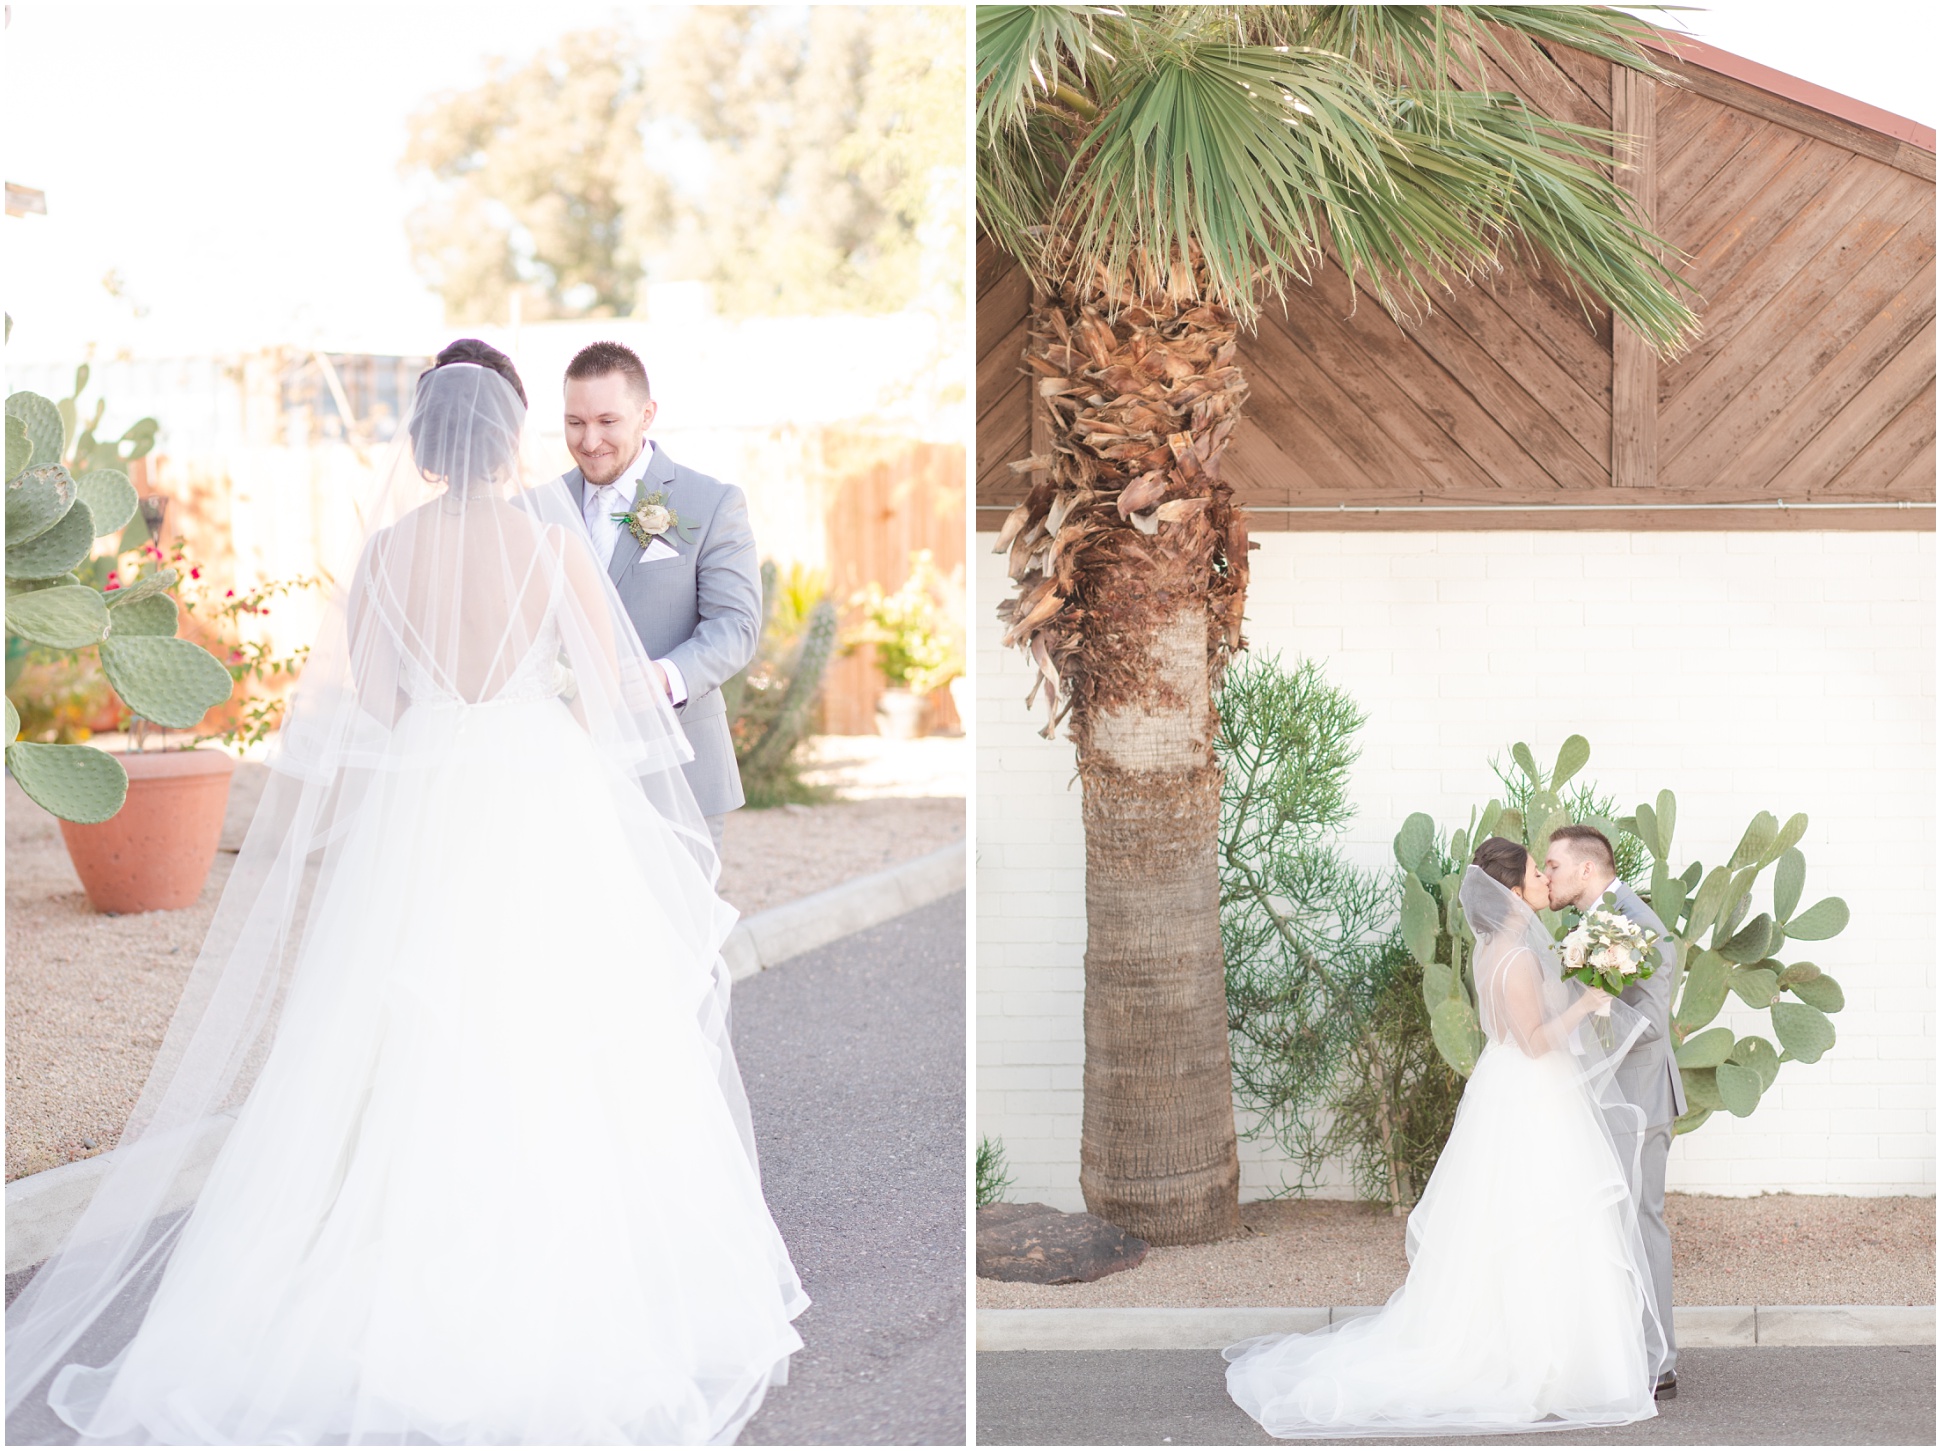 Groom looking at bride with excitement, Bride and Groom kissing in front of palm tree and cactus